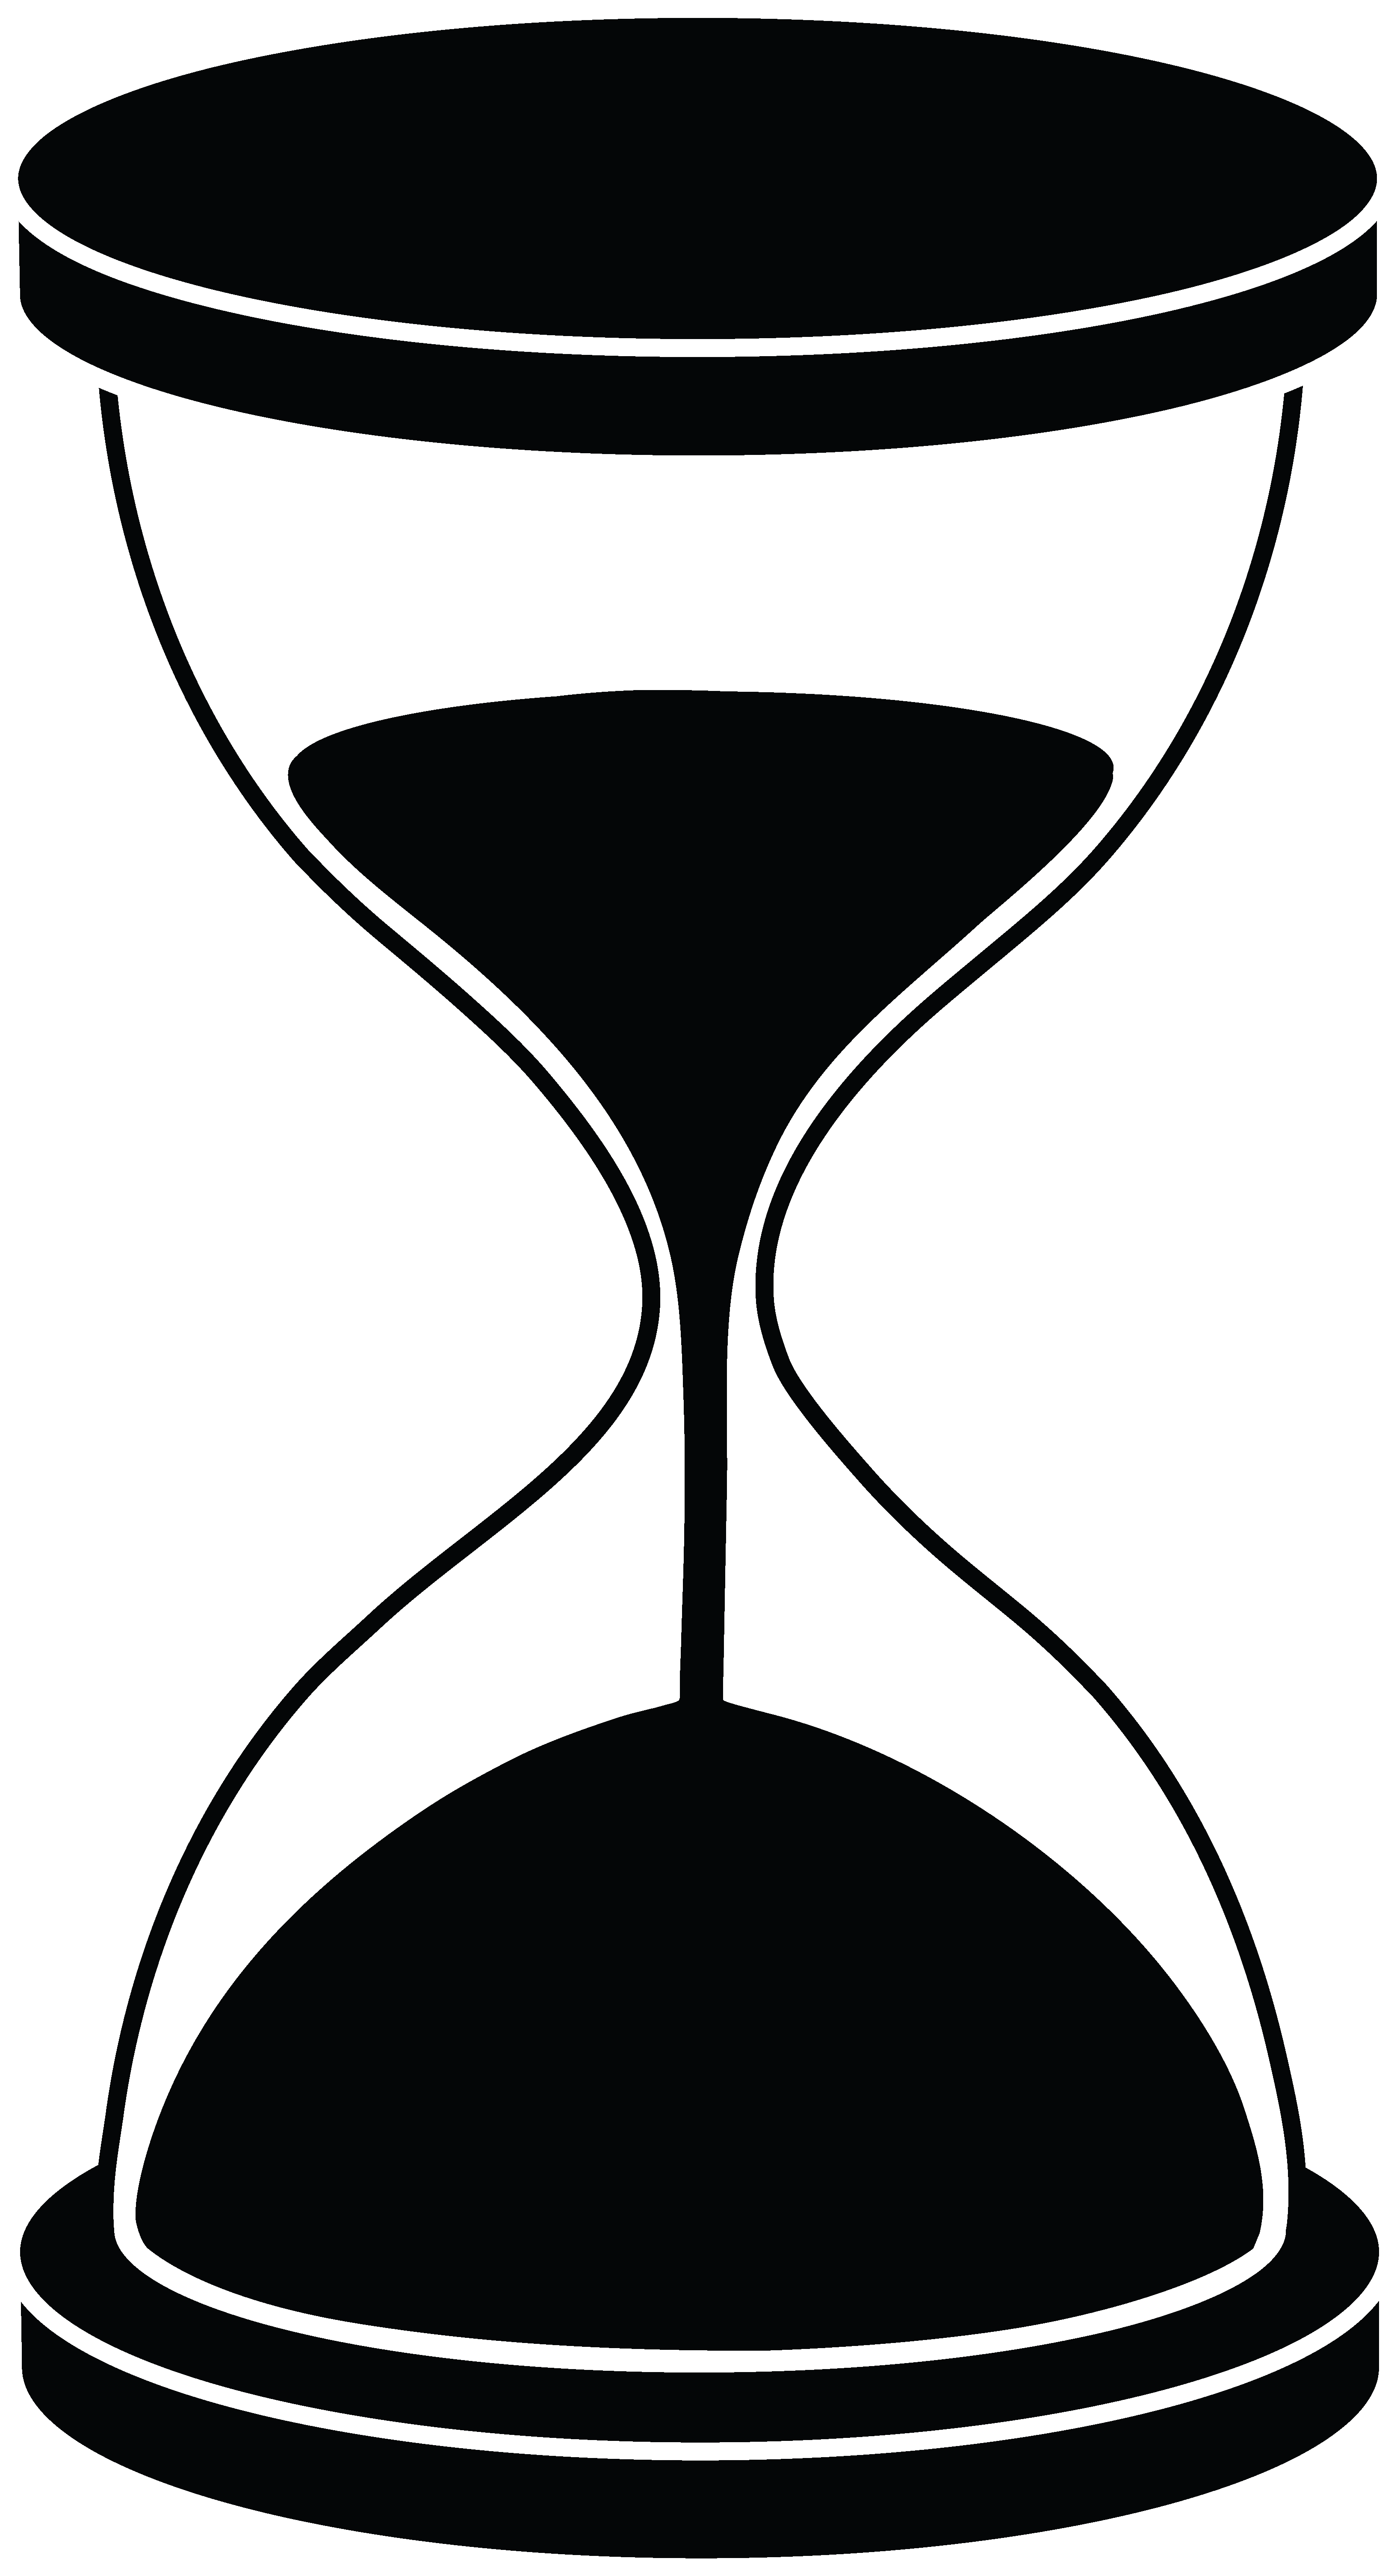 Free Hourglass Shape Cliparts, Download Free Clip Art, Free